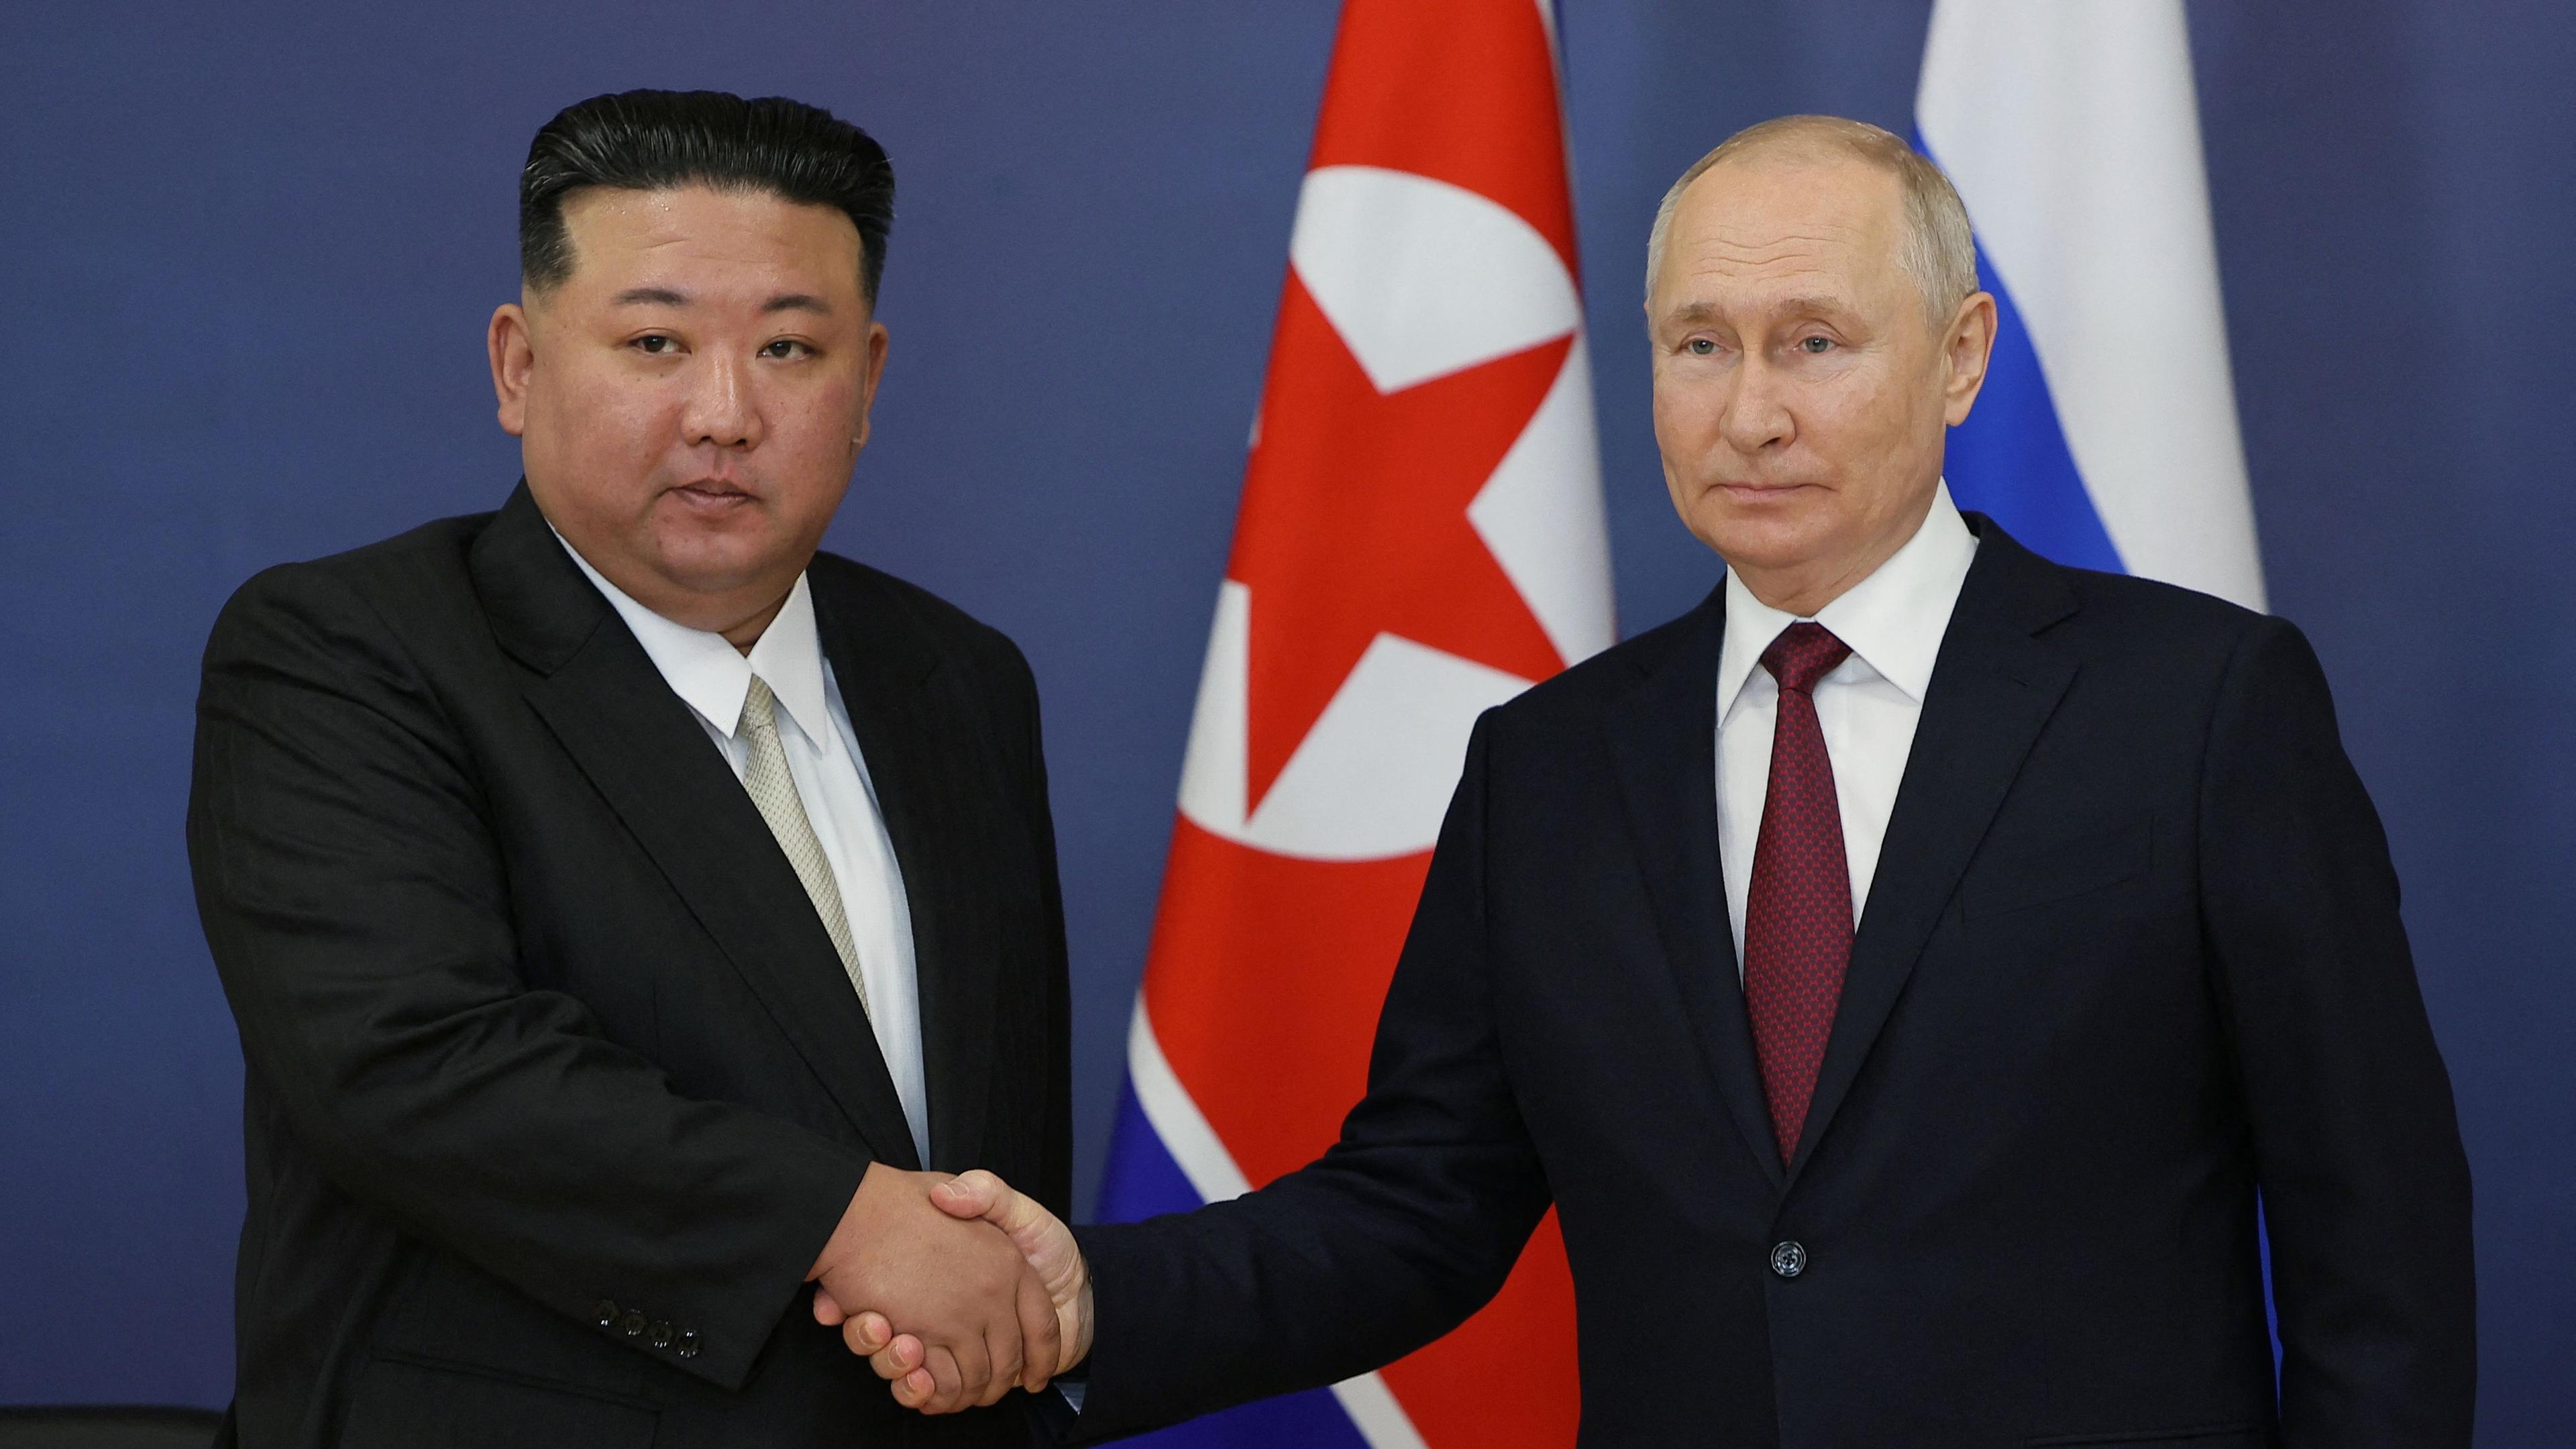 Russian President Vladimir Putin (R) and North Korea's leader Kim Jong Un (L) shaking hands during their meeting at the Vostochny Cosmodrome in Amur region on September 13, 2023. North Korea's top diplomat said her country is "ready to greet" Russian President Vladimir Putin